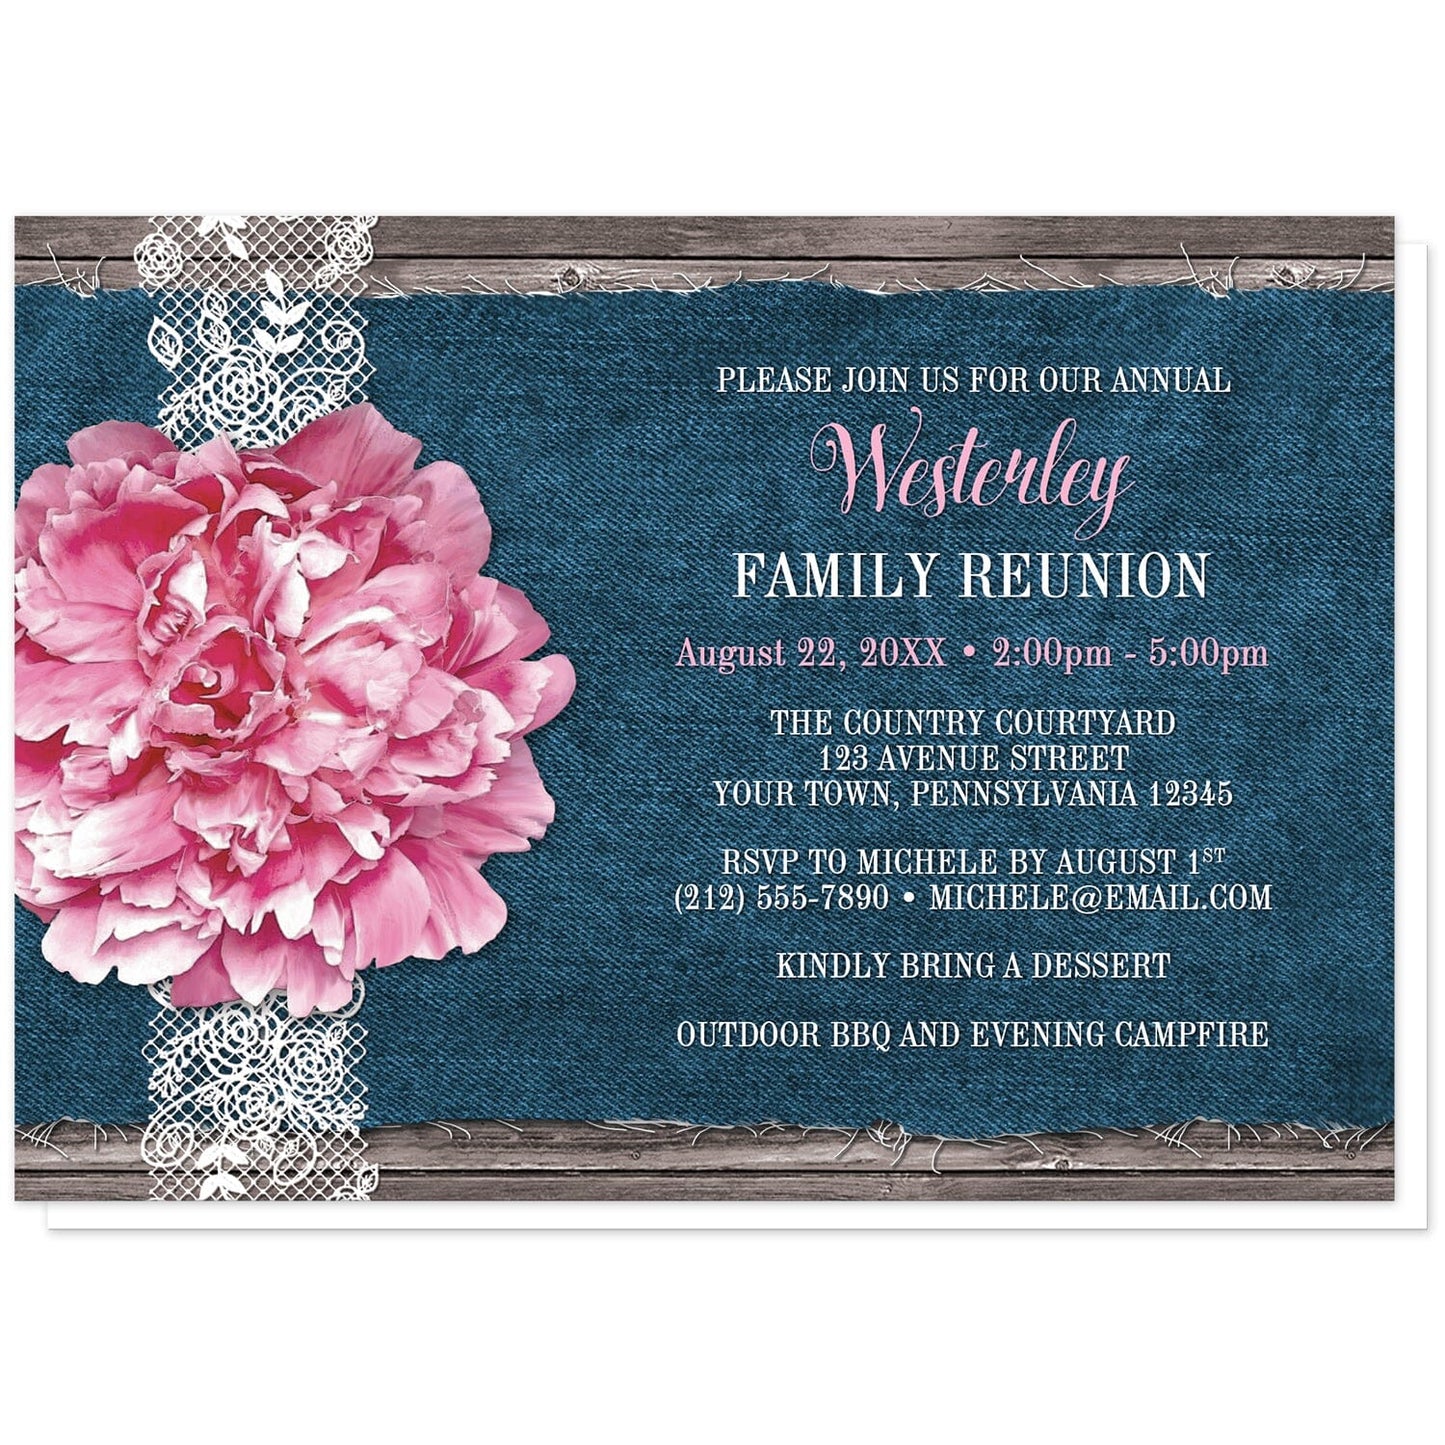 Pink Peony Denim and Lace Rustic Family Reunion Invitations at Artistically Invited. Southern-inspired pink peony denim and lace rustic family reunion invitations with a pretty pink peony flower on a white lace ribbon design on the left side over a fraying navy blue denim illustration on a rustic wood background. Your personalized reunion celebration details are custom printed in white and pink over the blue denim design. 